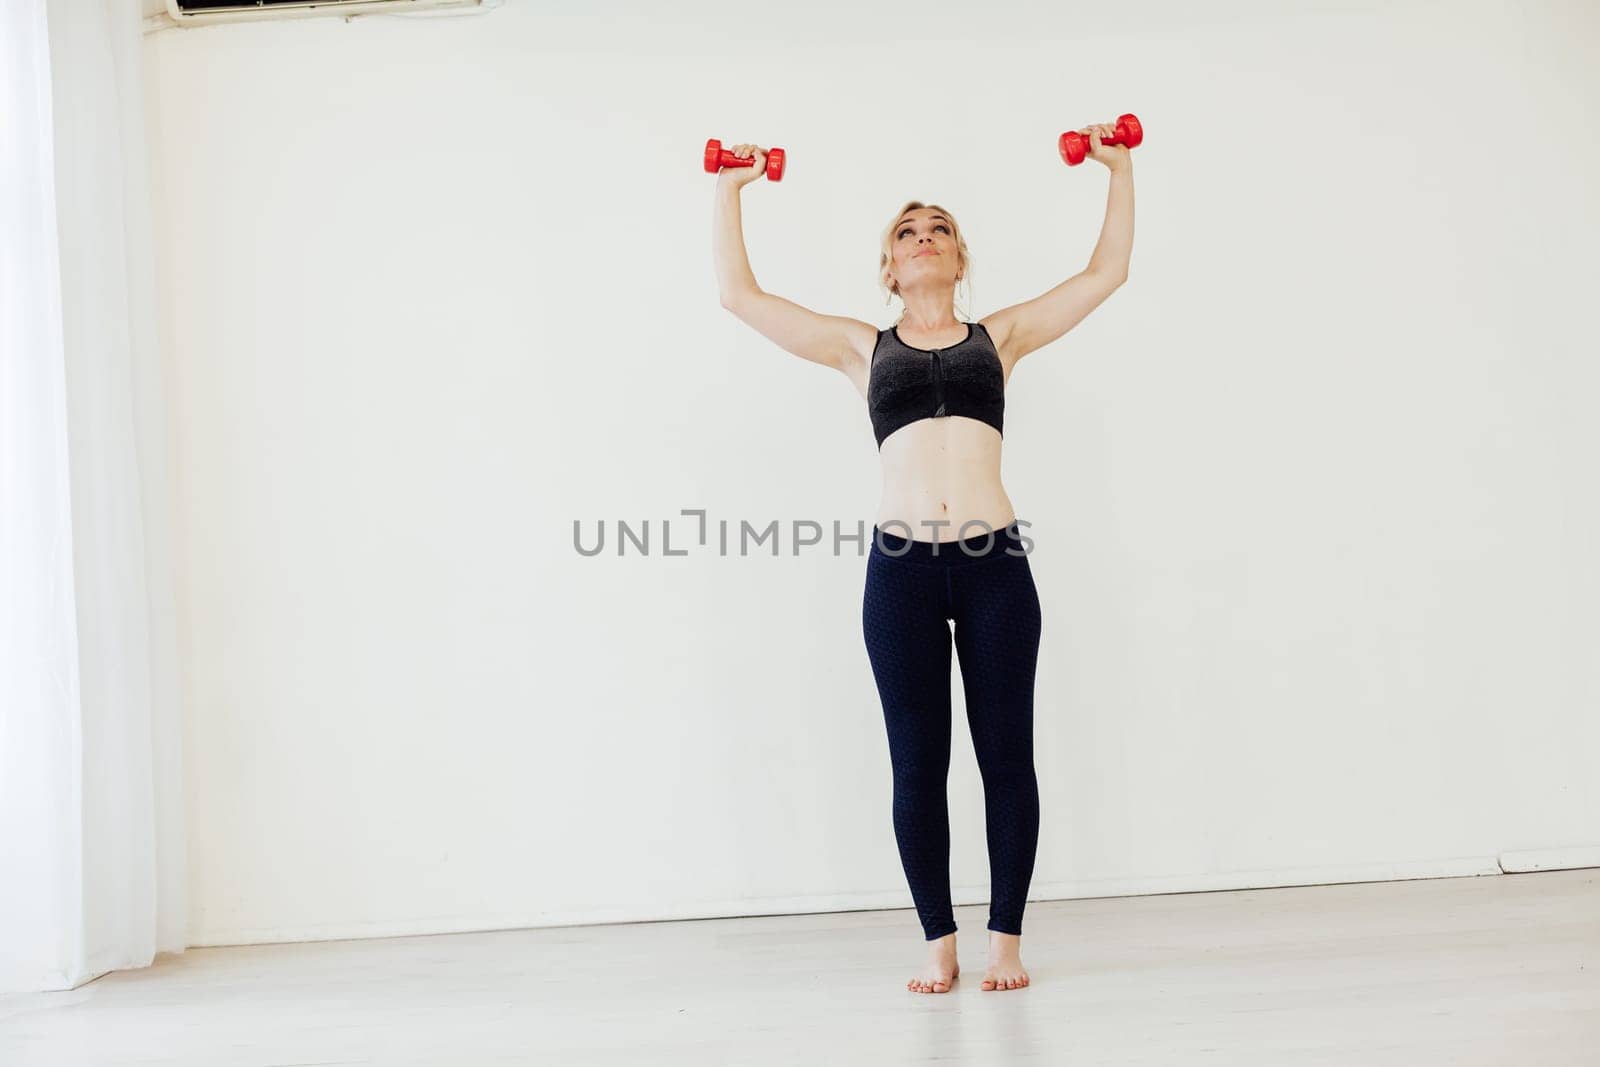 Blonde woman engaged in argument in the gym with fitness dumbbells